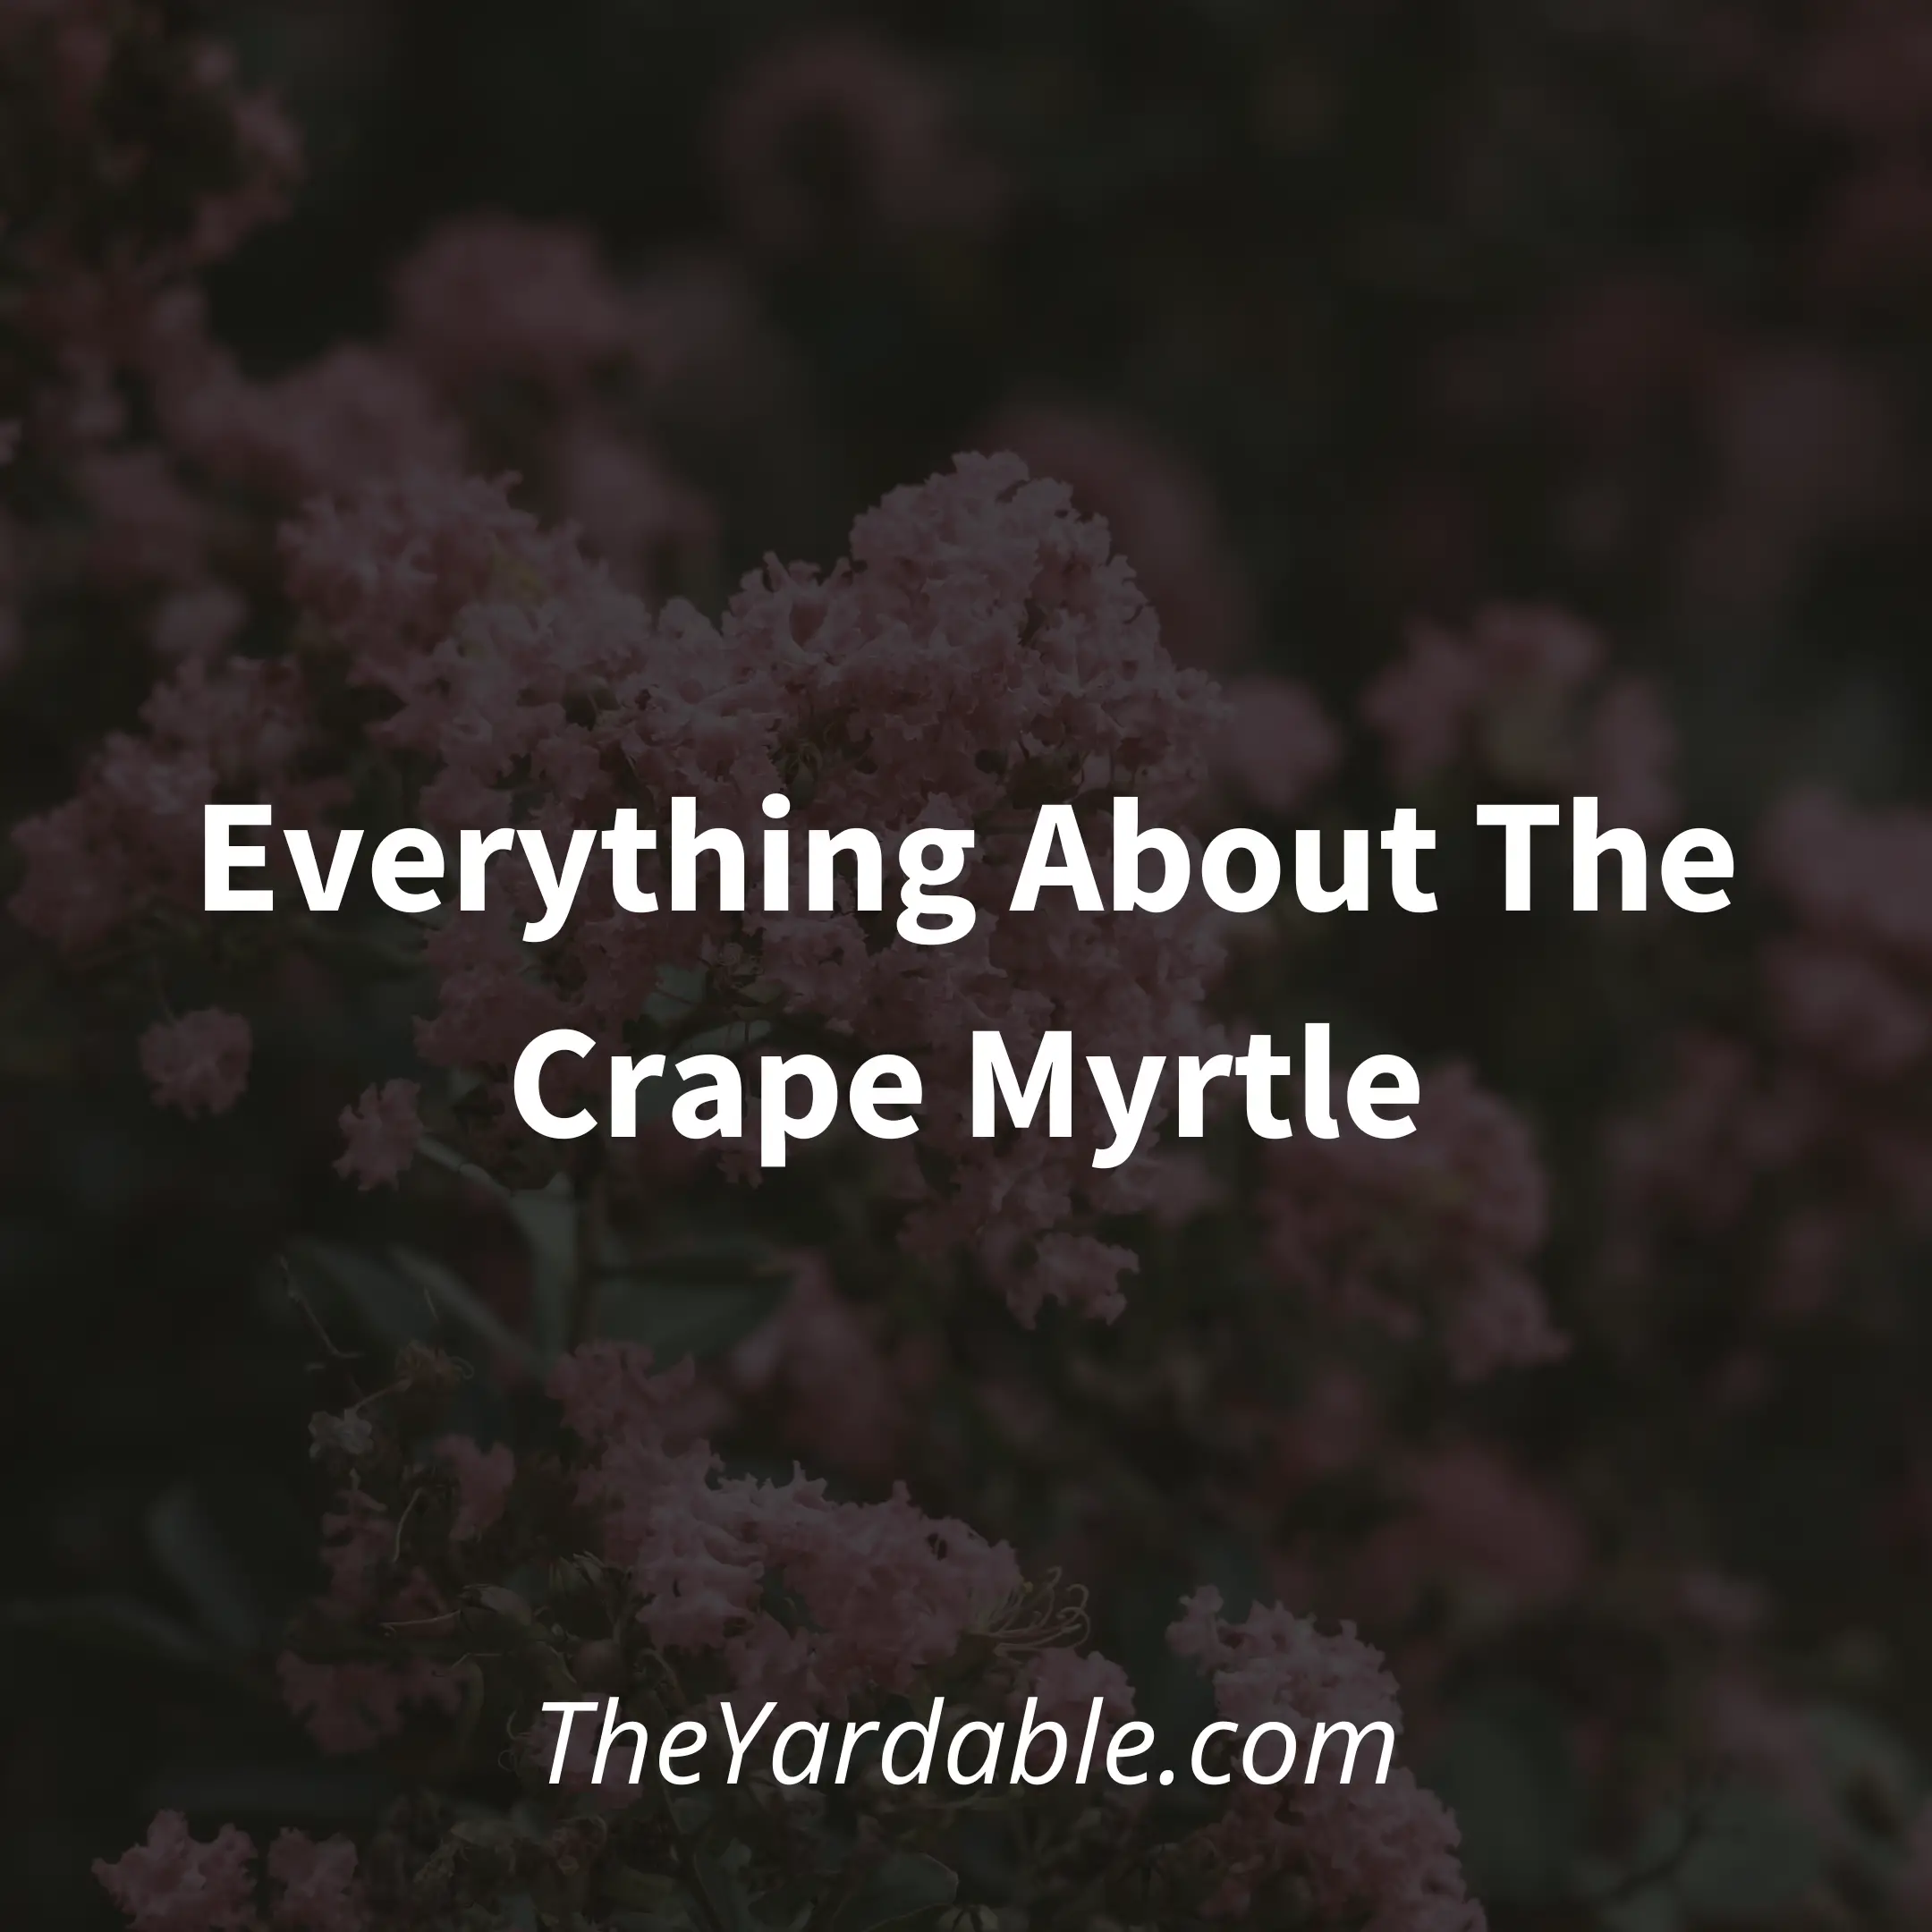 Crape Myrtle Shrub: Everything About The Crape Myrtle Tree